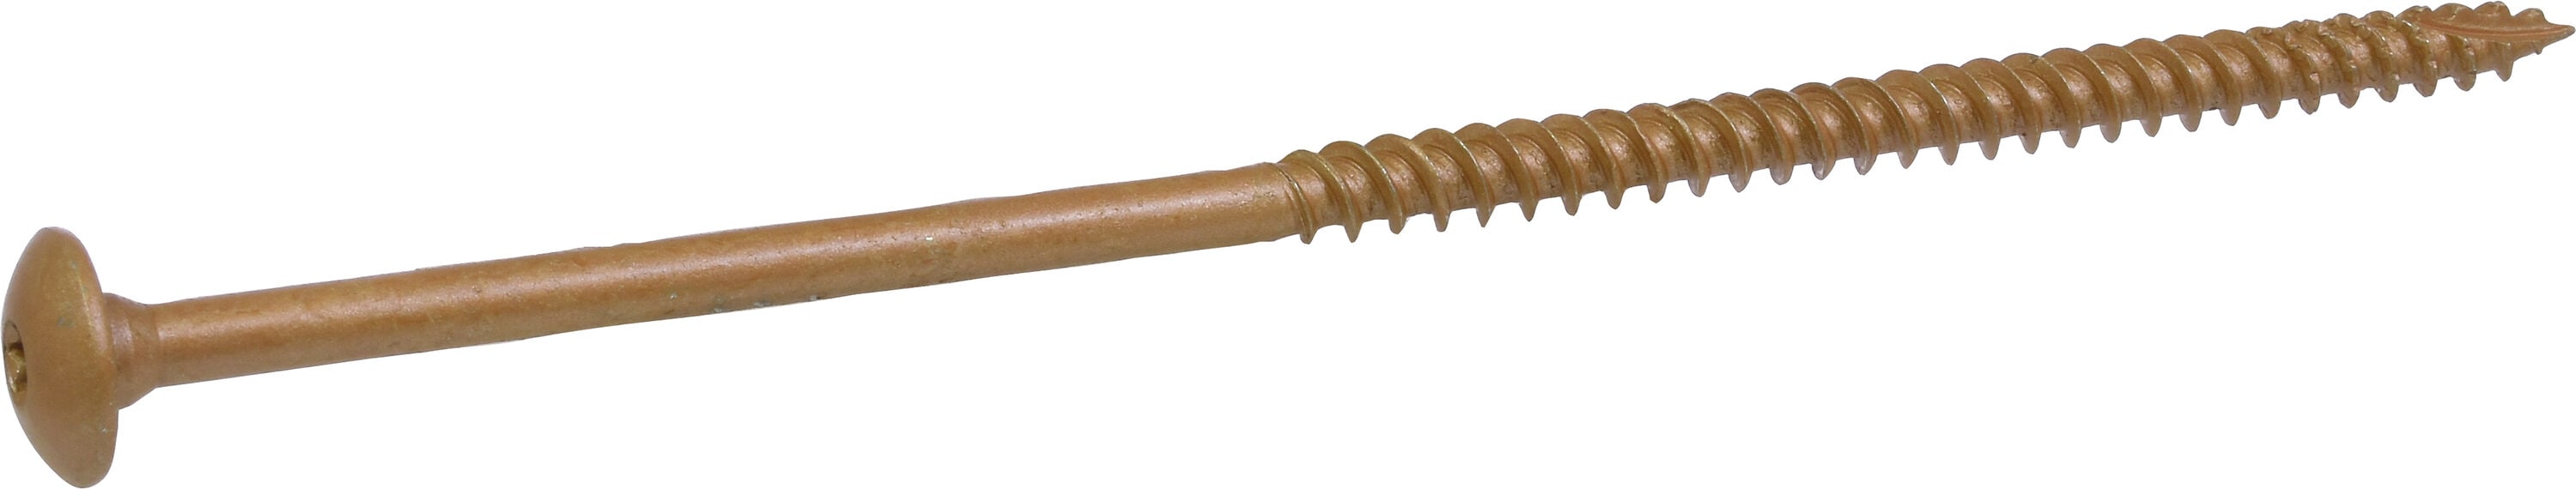 Construction Screws and PowerLags®